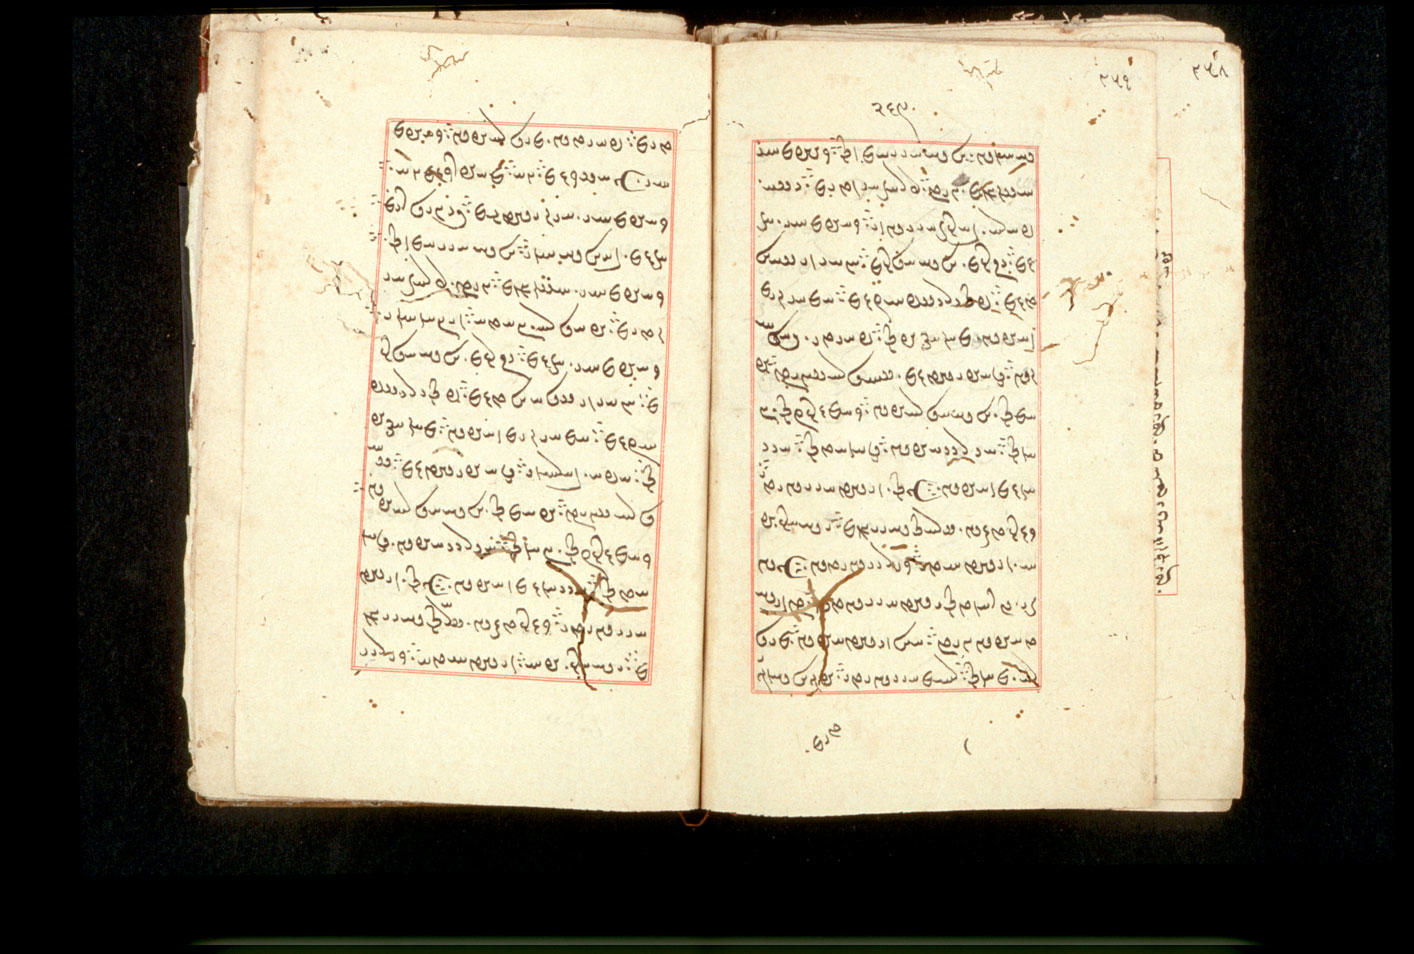 Folios 269v (right) and 270r (left)